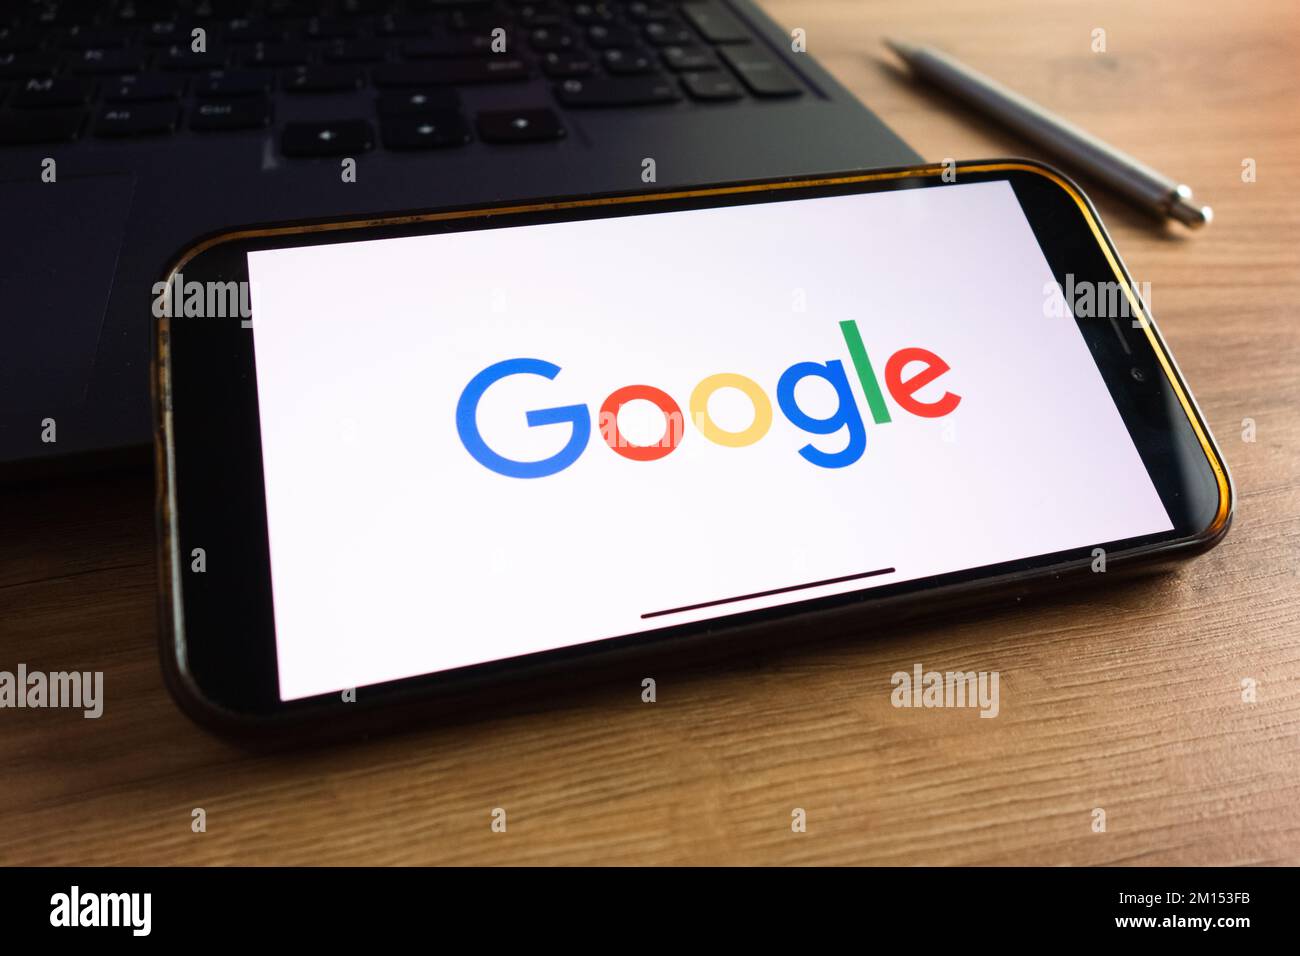 KONSKIE, POLAND - September 17, 2022: Google Search logo displayed on smartphone screen in the office. Google Search is the most popular web search en Stock Photo